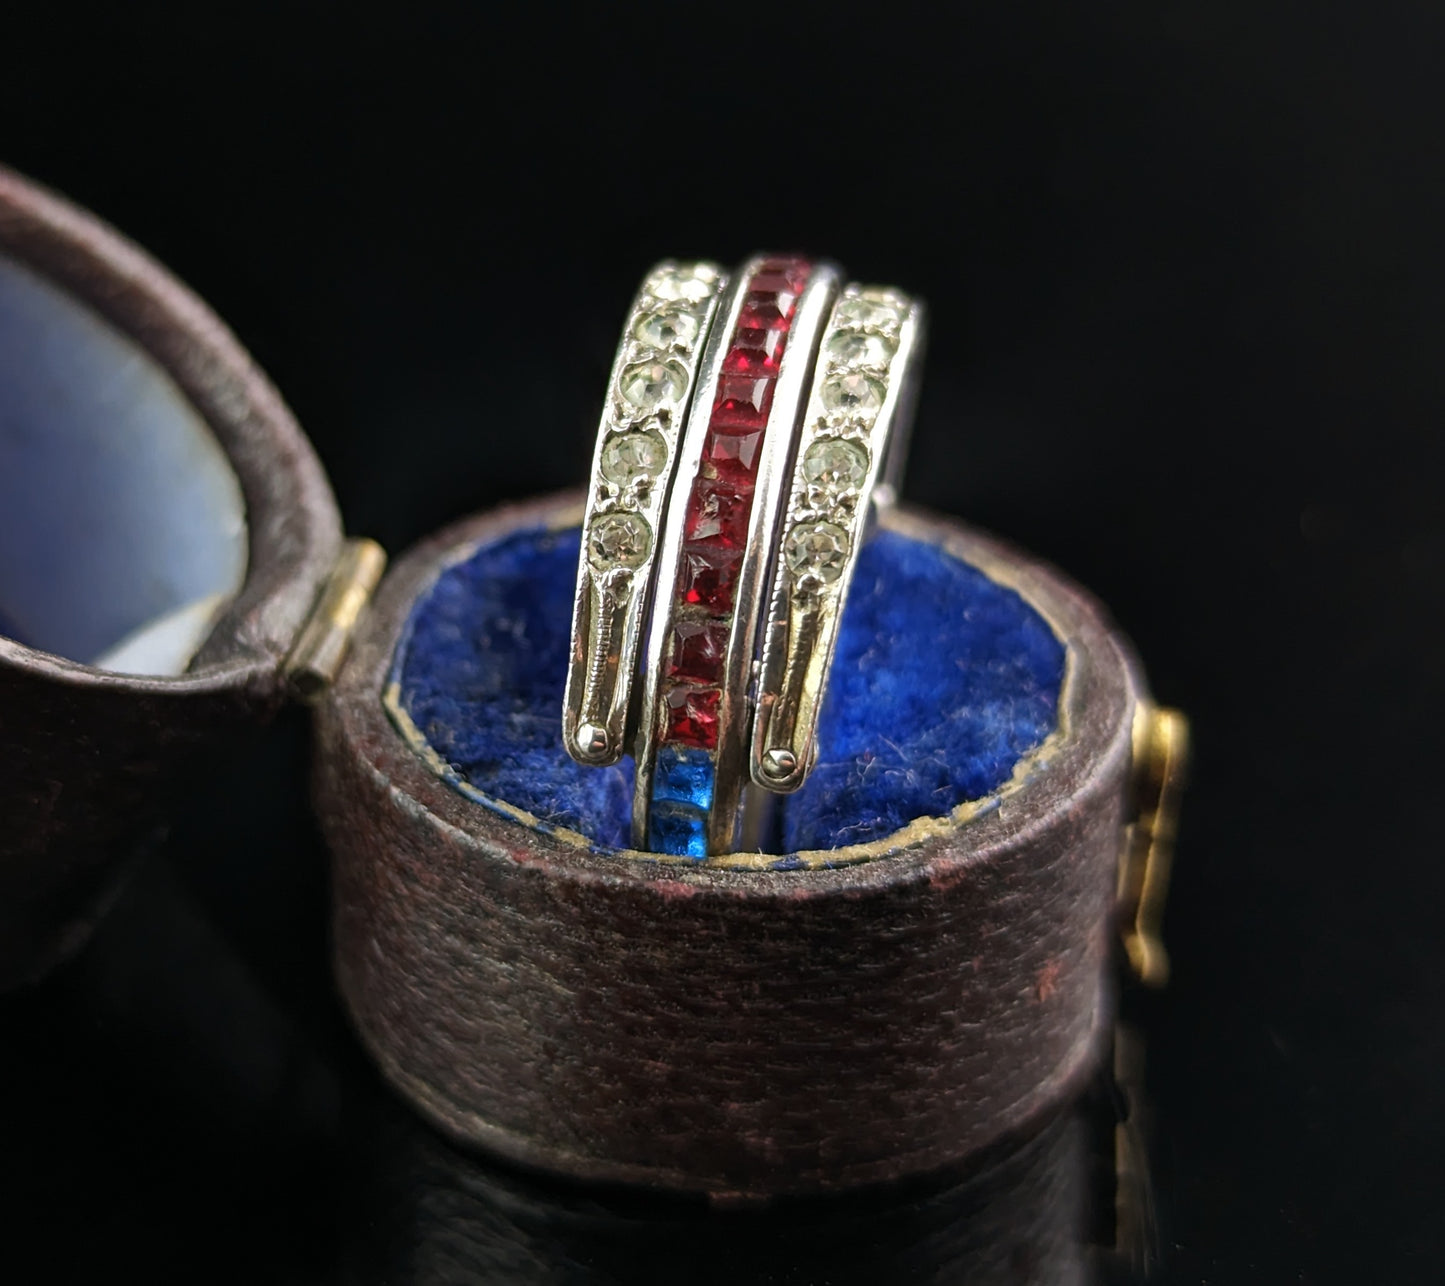 Vintage Art Deco paste Eternity ring, Day to Night, Flippable